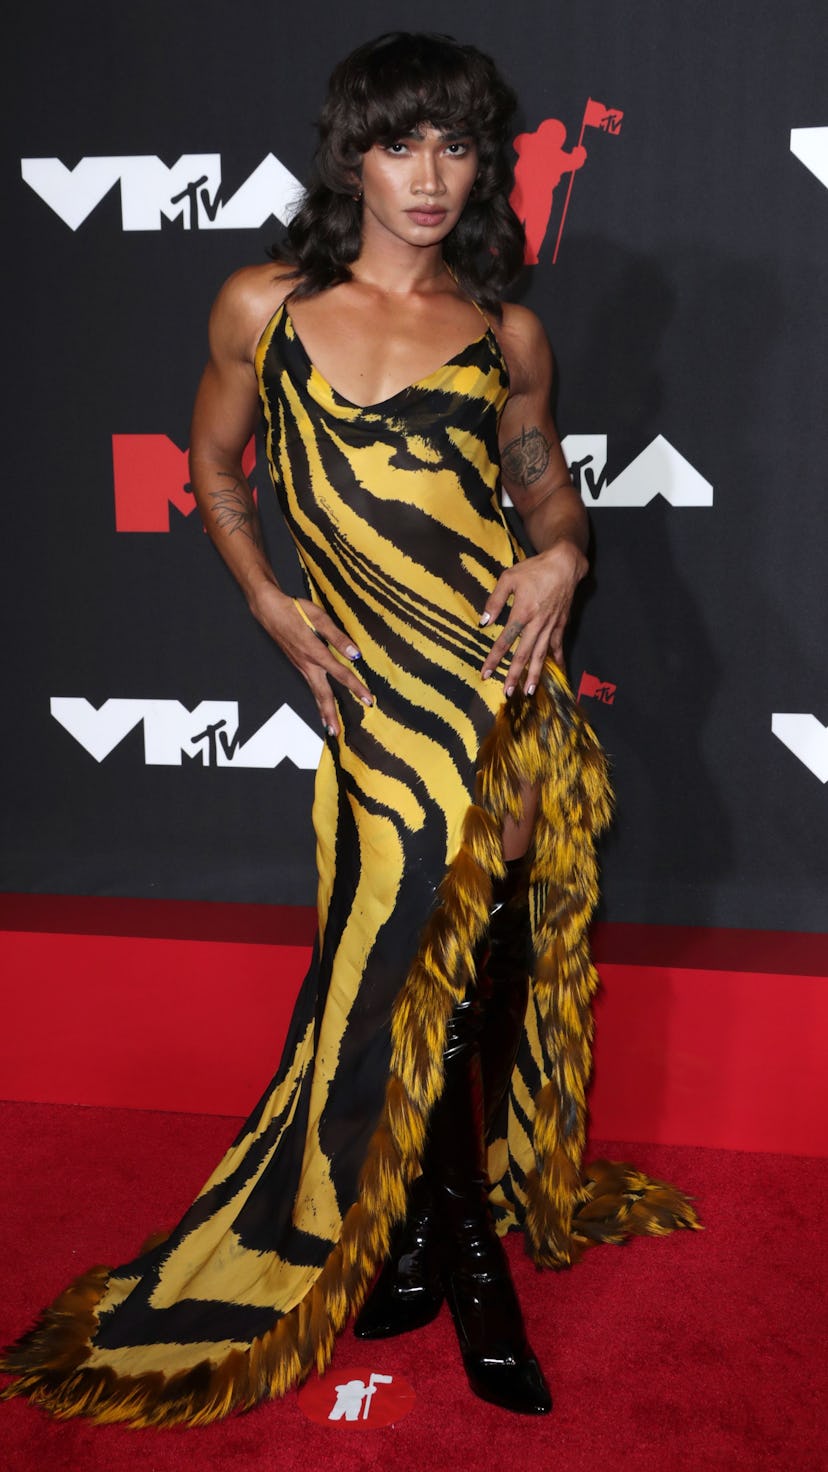 Bretman Rock at the 2021 VMAs in a yellow-and-black dress that Aaliyah wore to the 2001 VMAs.